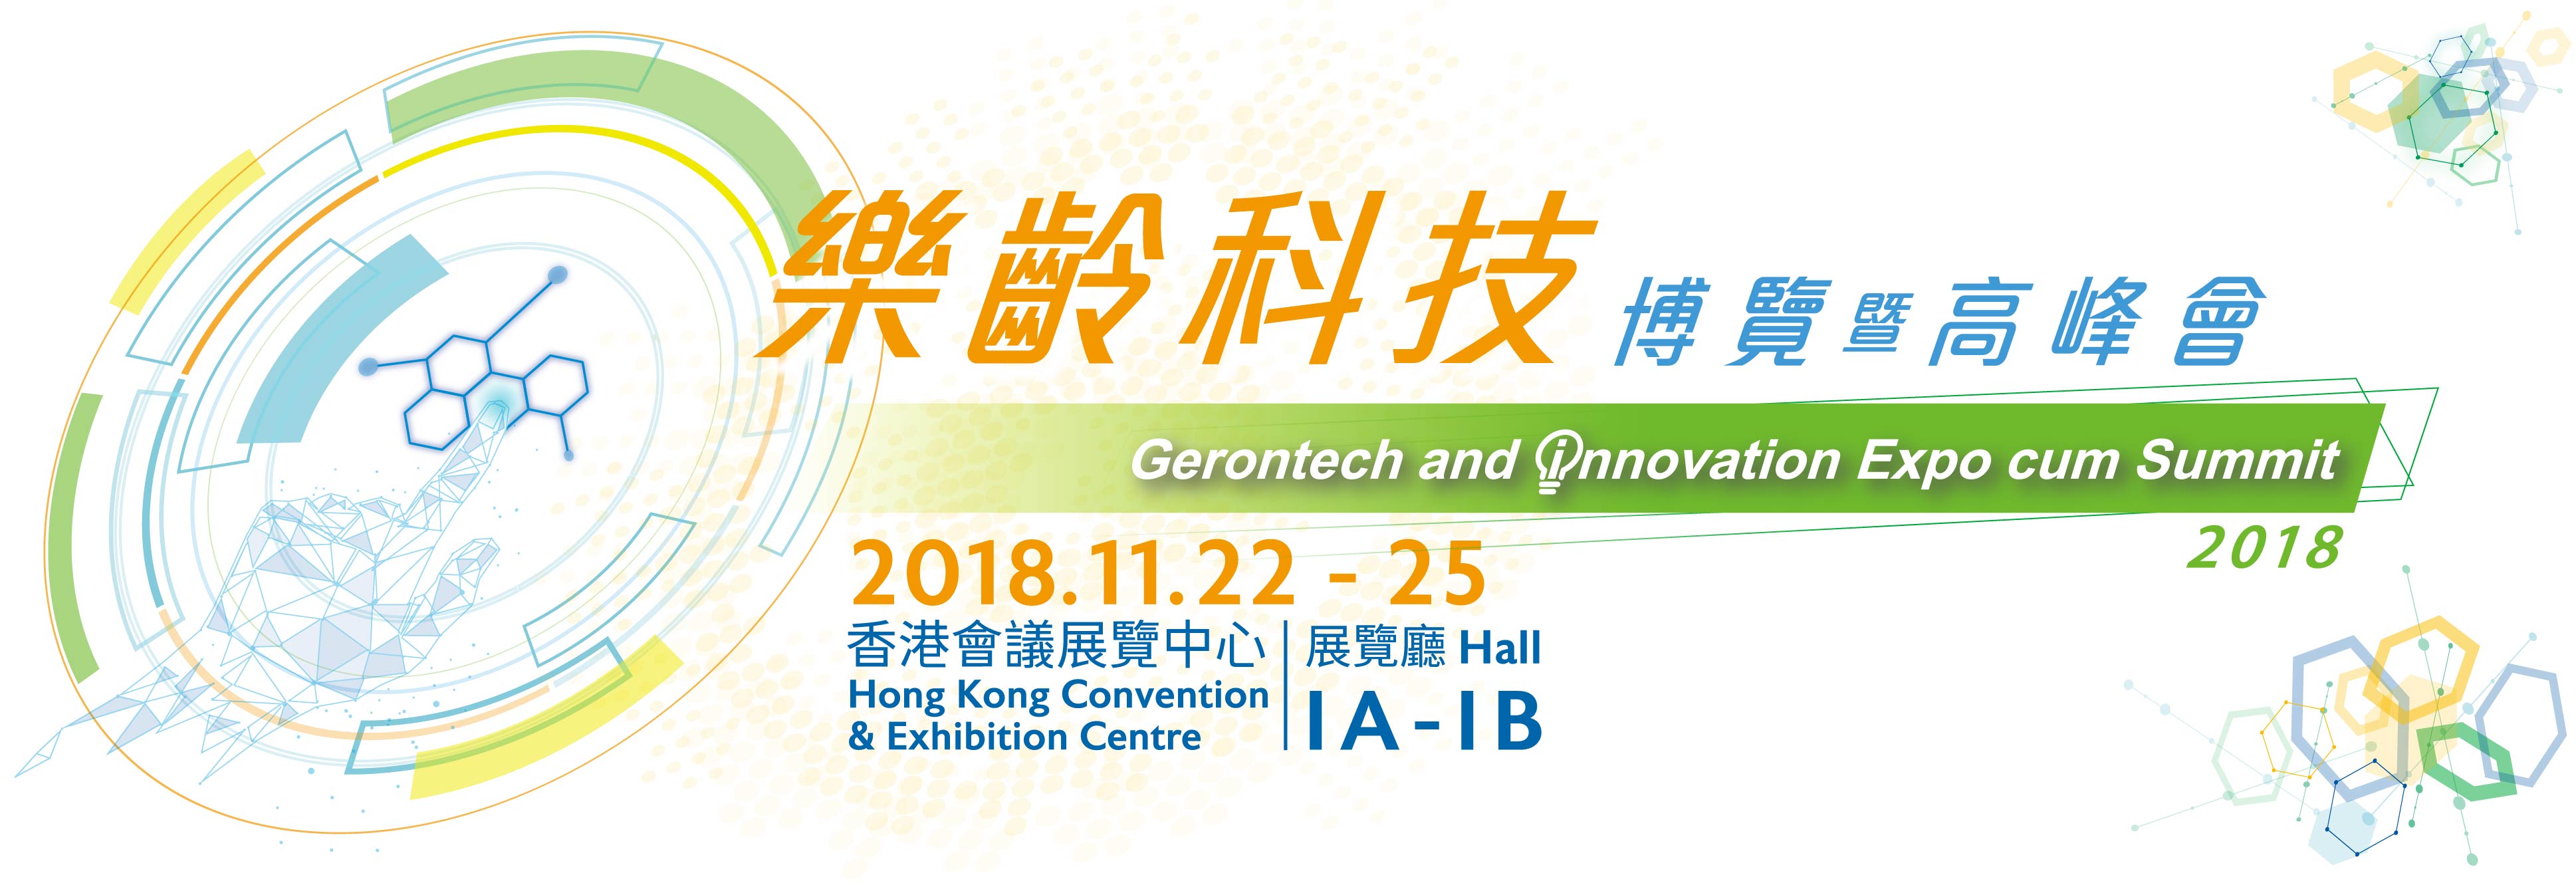 Gerontech and Innovation Expo to make comeback later this month